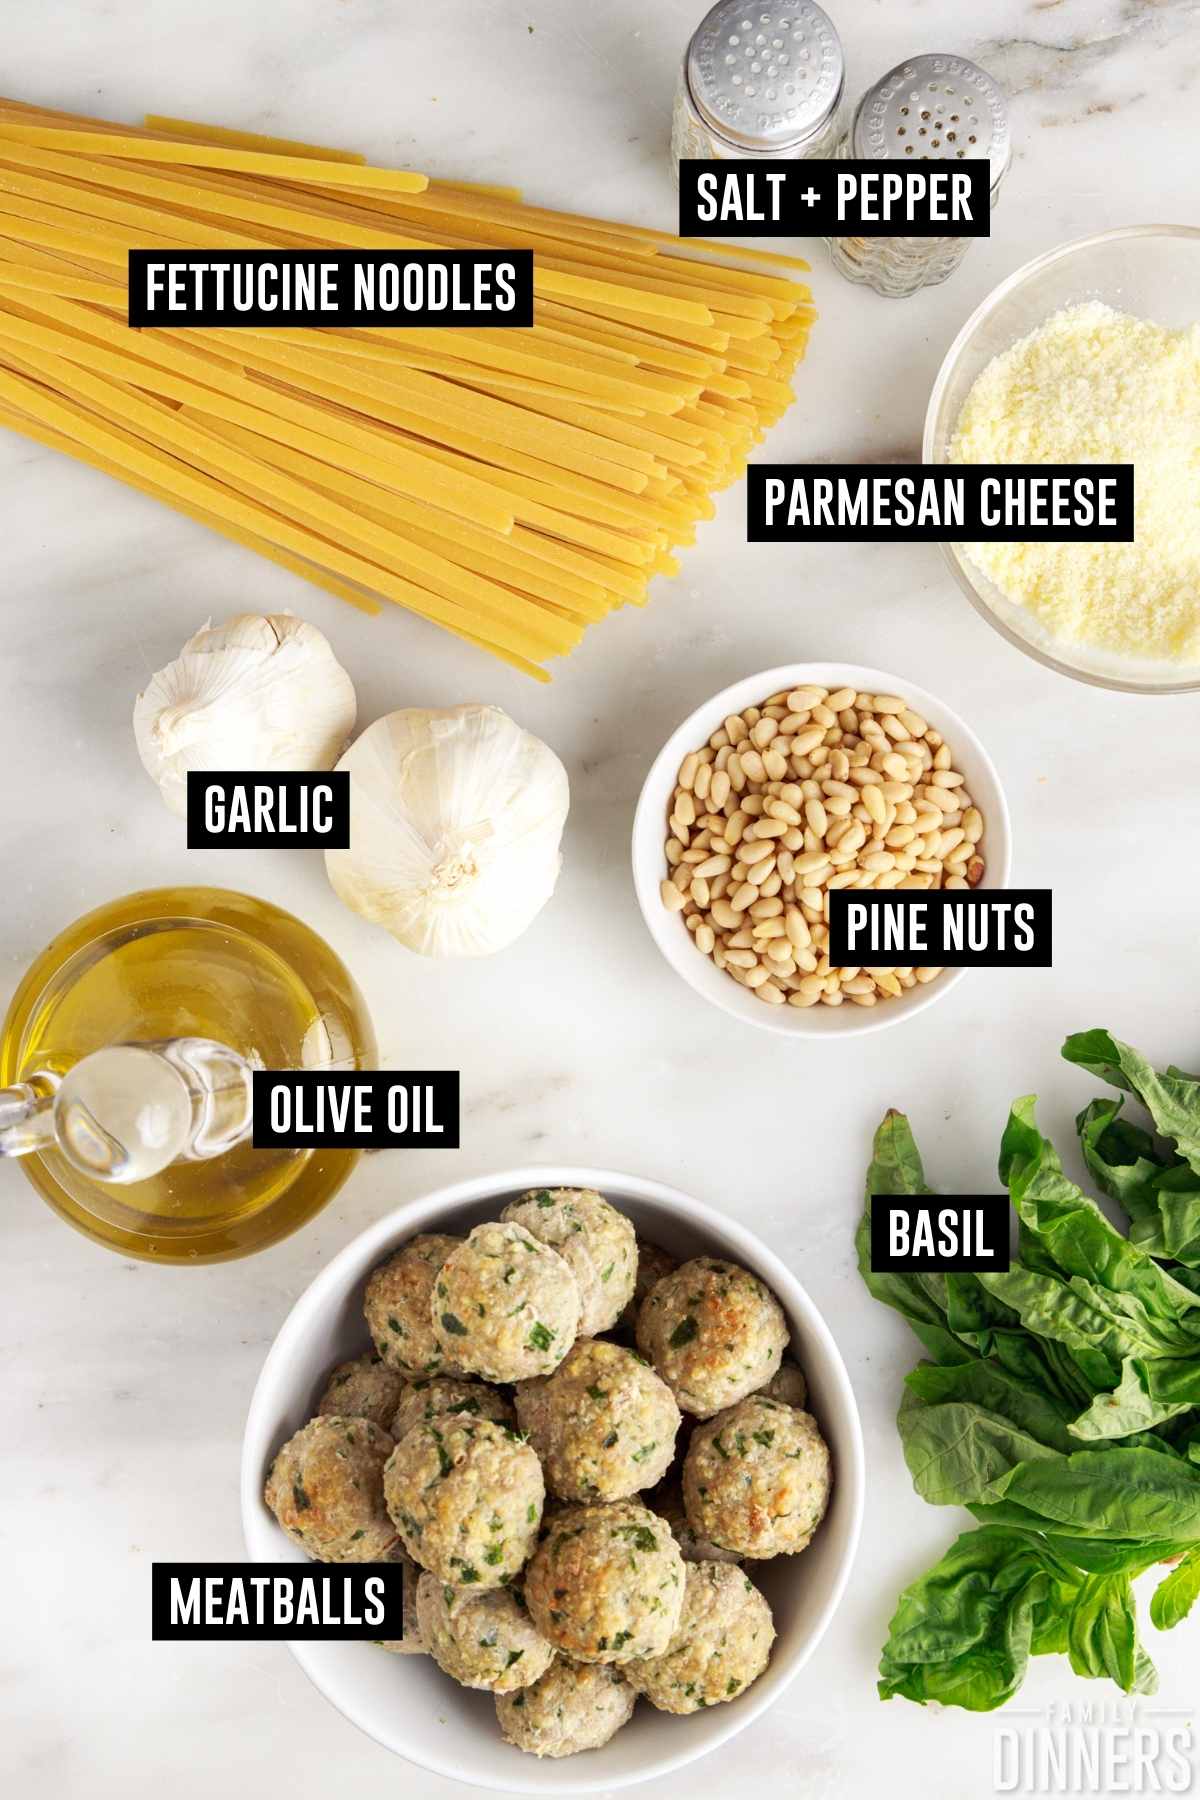 Basil pesto pasta with meatballs ingredients on a counter including: dried fettuccine, garlic, olive oil, parmesan cheese, pine nuts, salt, pepper, basil, garlic and meatballs.